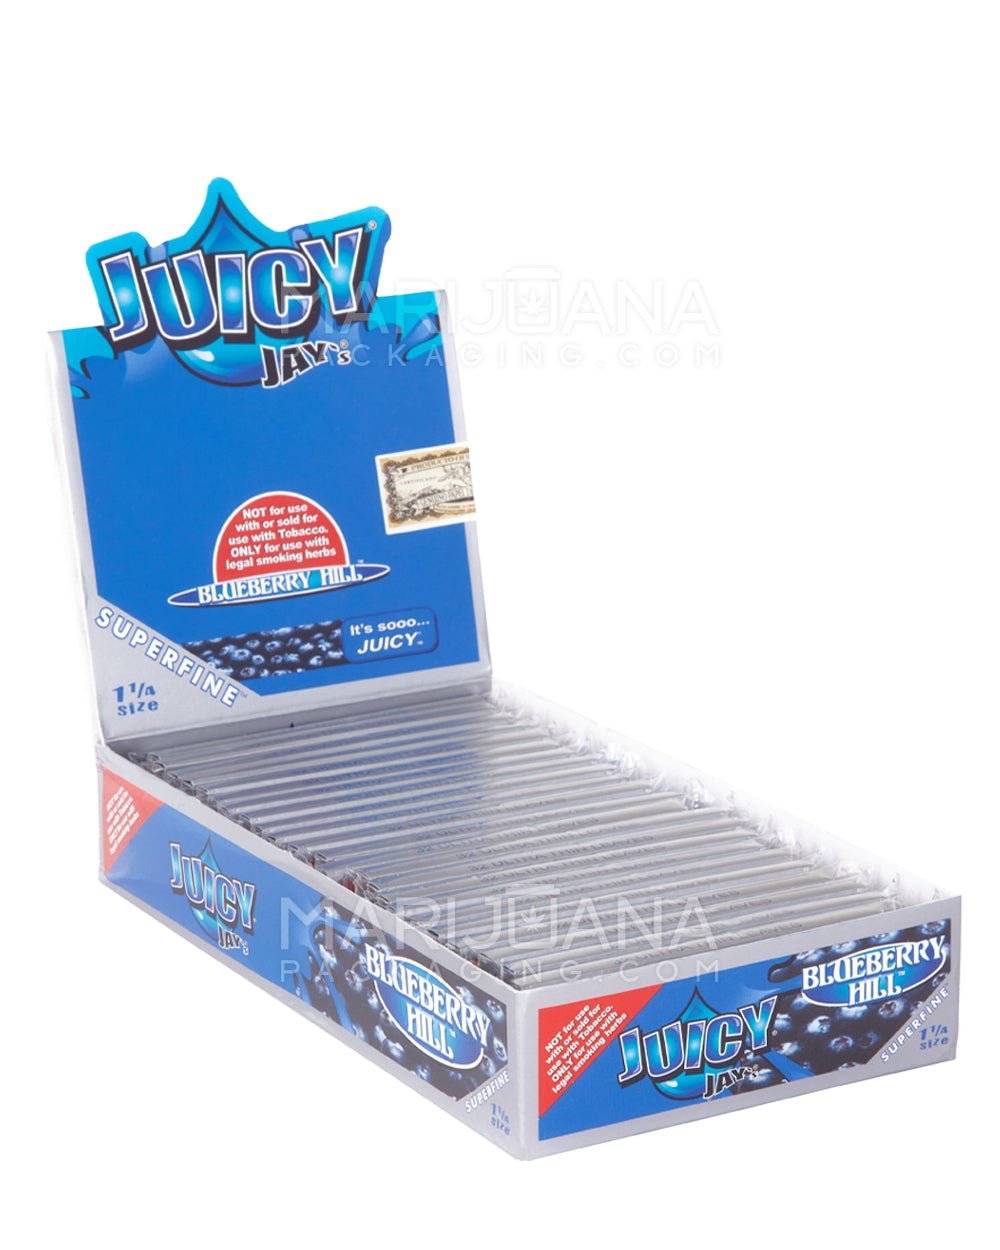 JUICY JAY'S | 'Retail Display' 1 1/4 Size Hemp Rolling Papers | 76mm - Blueberry - 24 Count - 1